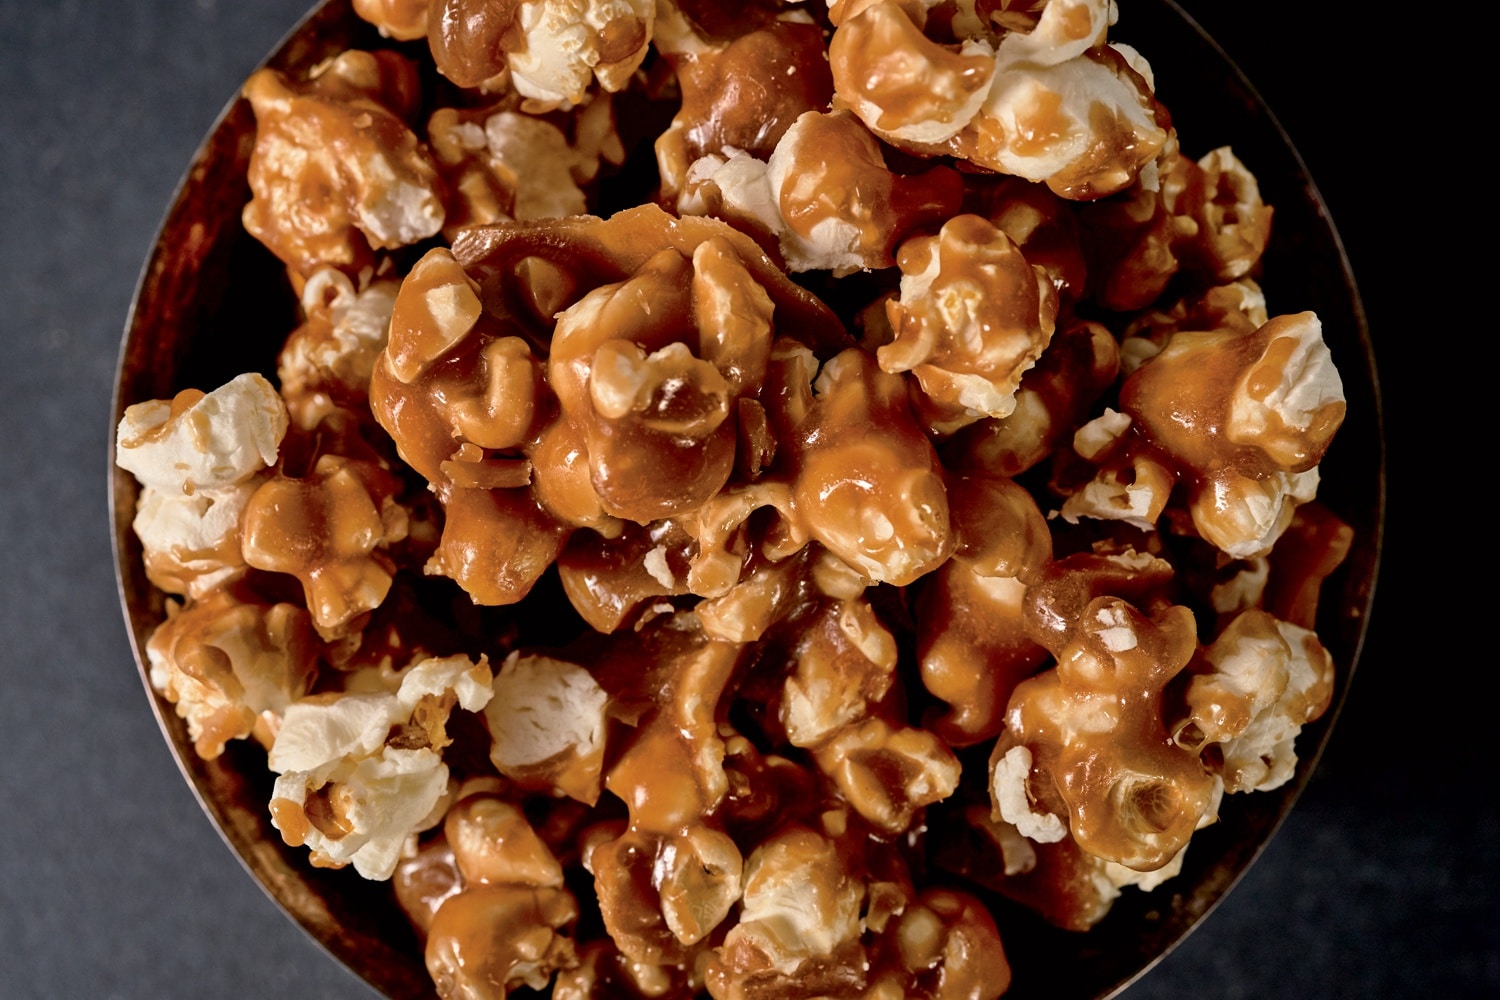 Maple Toffee Popcorn with Salted Peanuts Recipe from Gesine Bullock